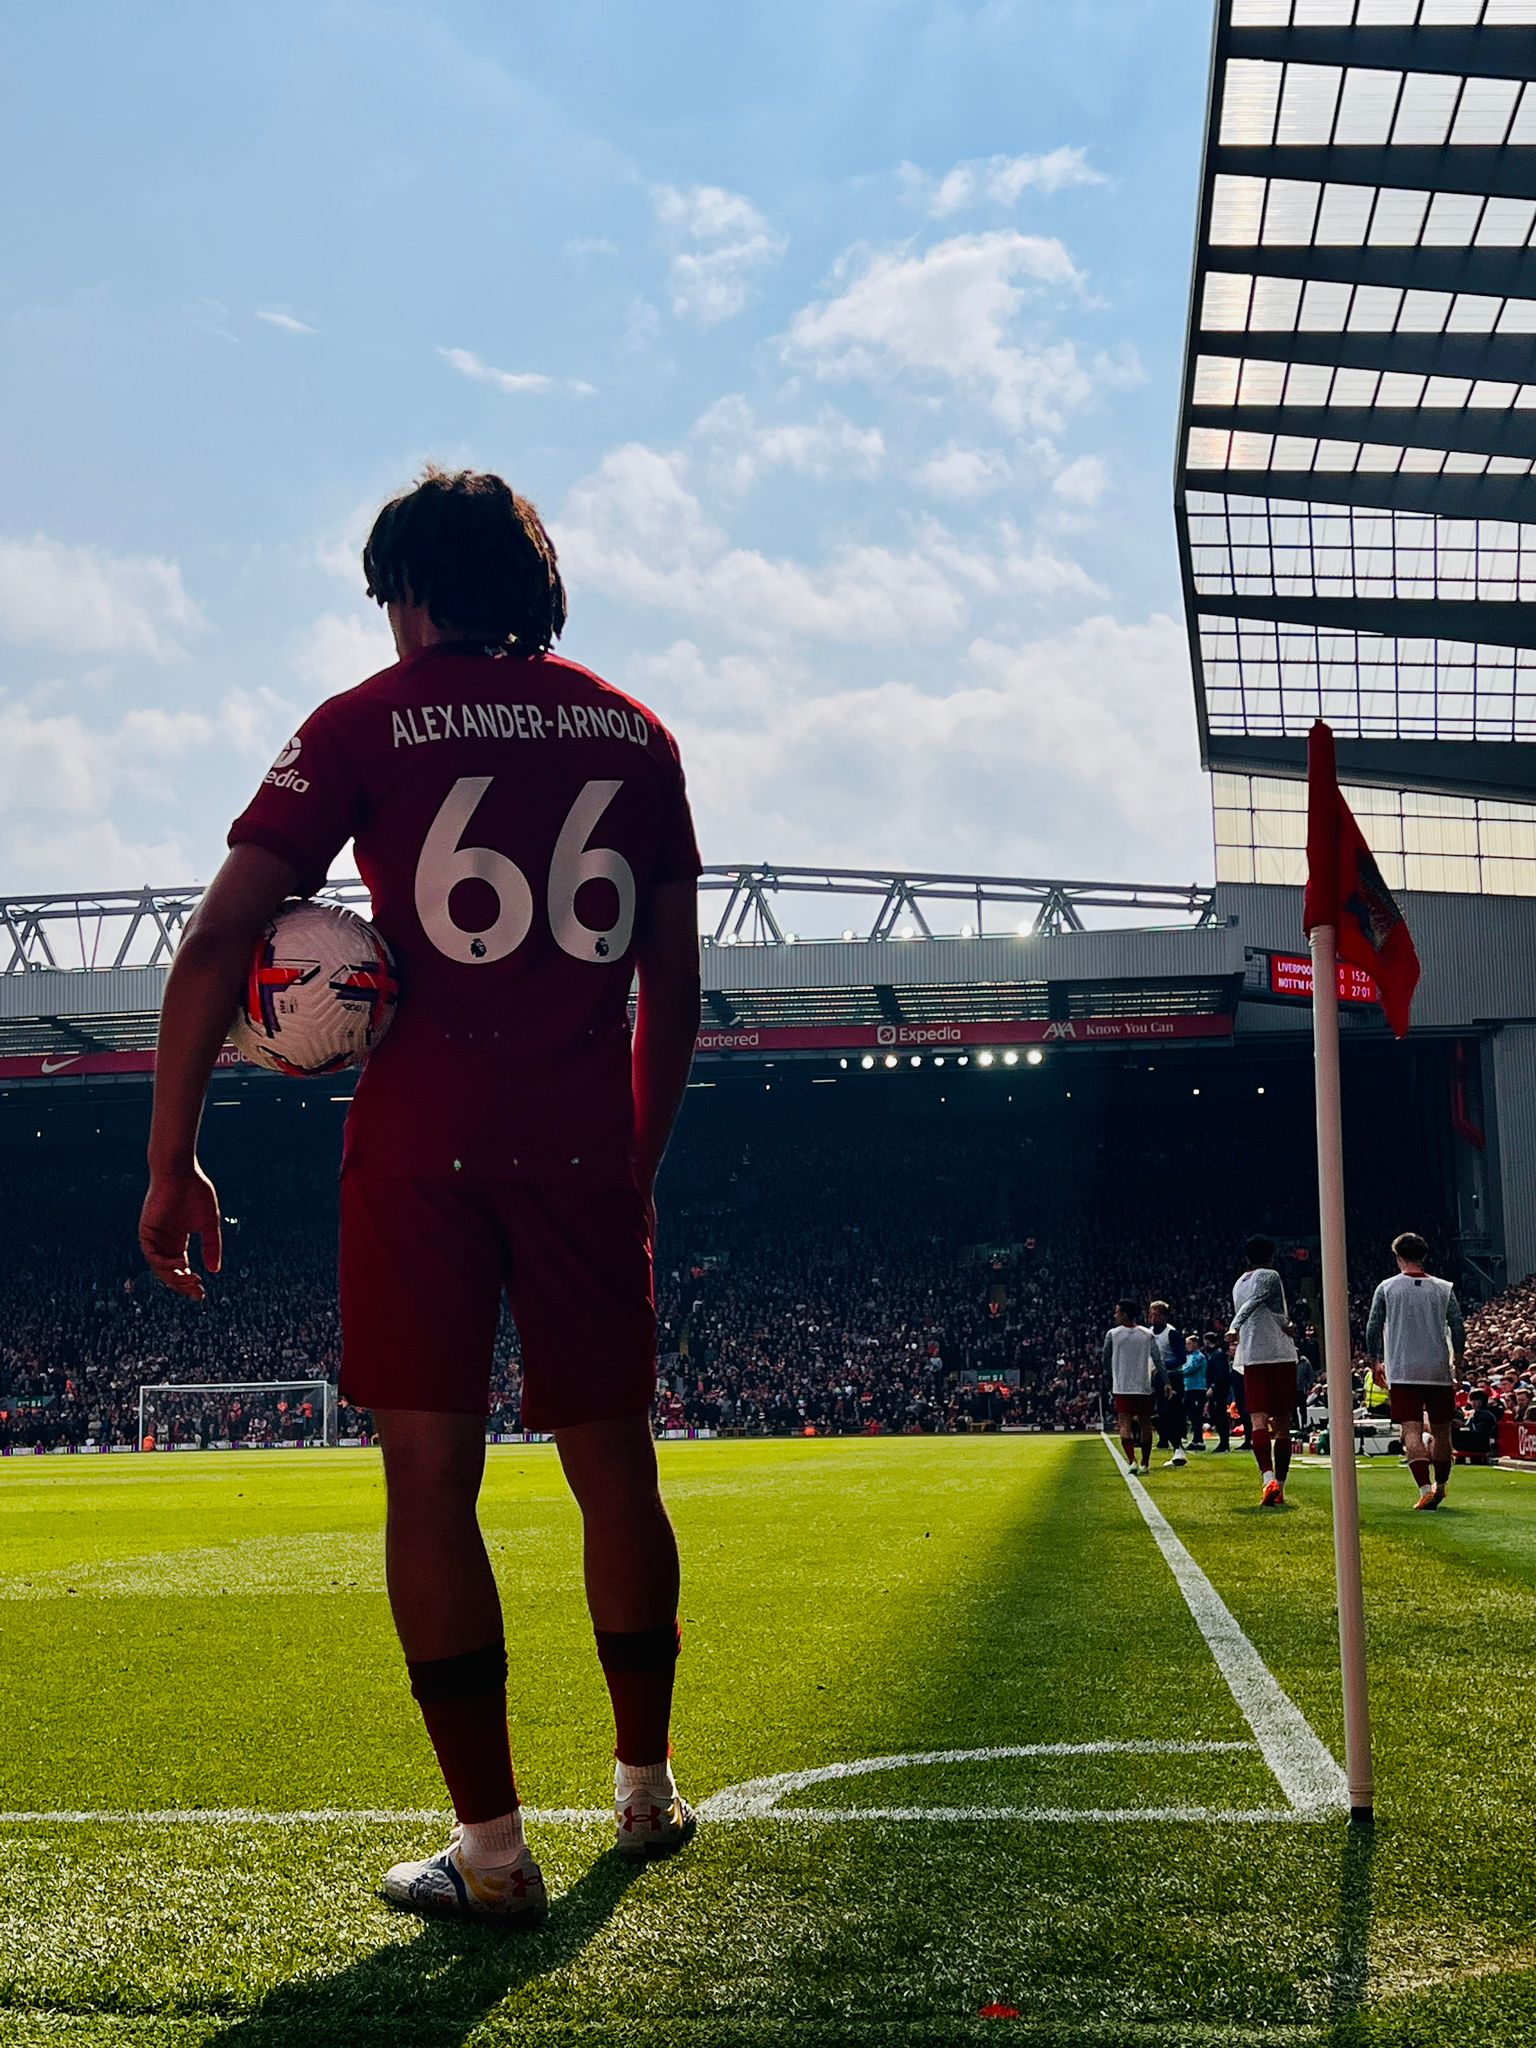 Trent Alexander-Arnold waiting to take a corner at the Anfield Road end against Nottingham Forest.